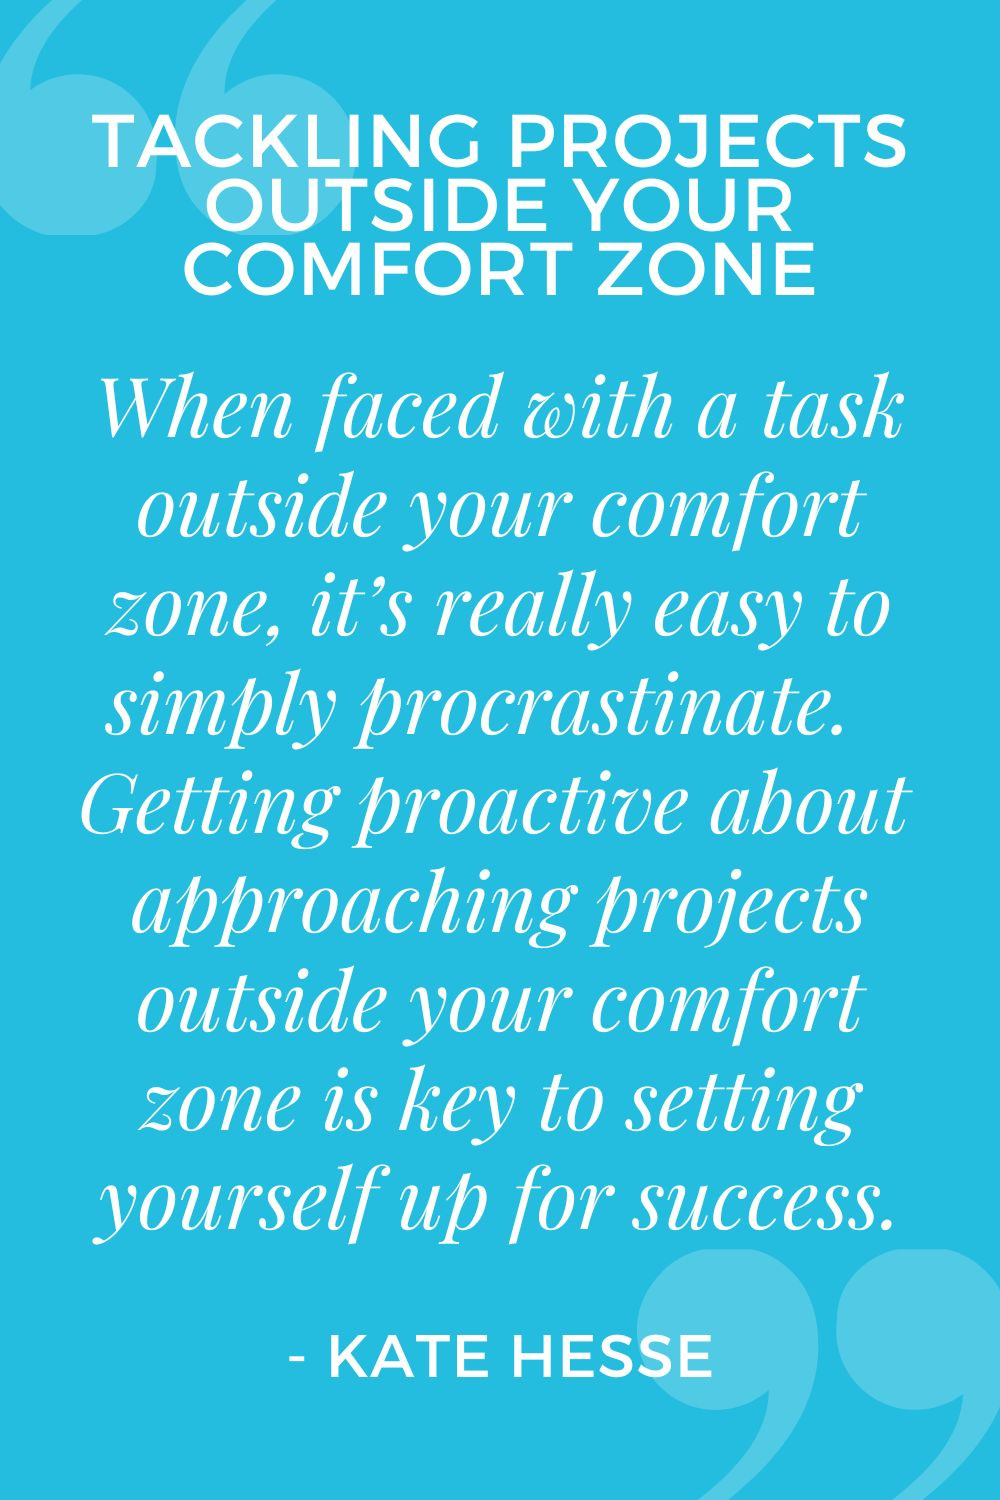 When faced with a task outside your comfort zone, it's really easy to simply procrastinate. Getting proactive about approaching projects outside your comfort zone is key to setting yourself up for success.